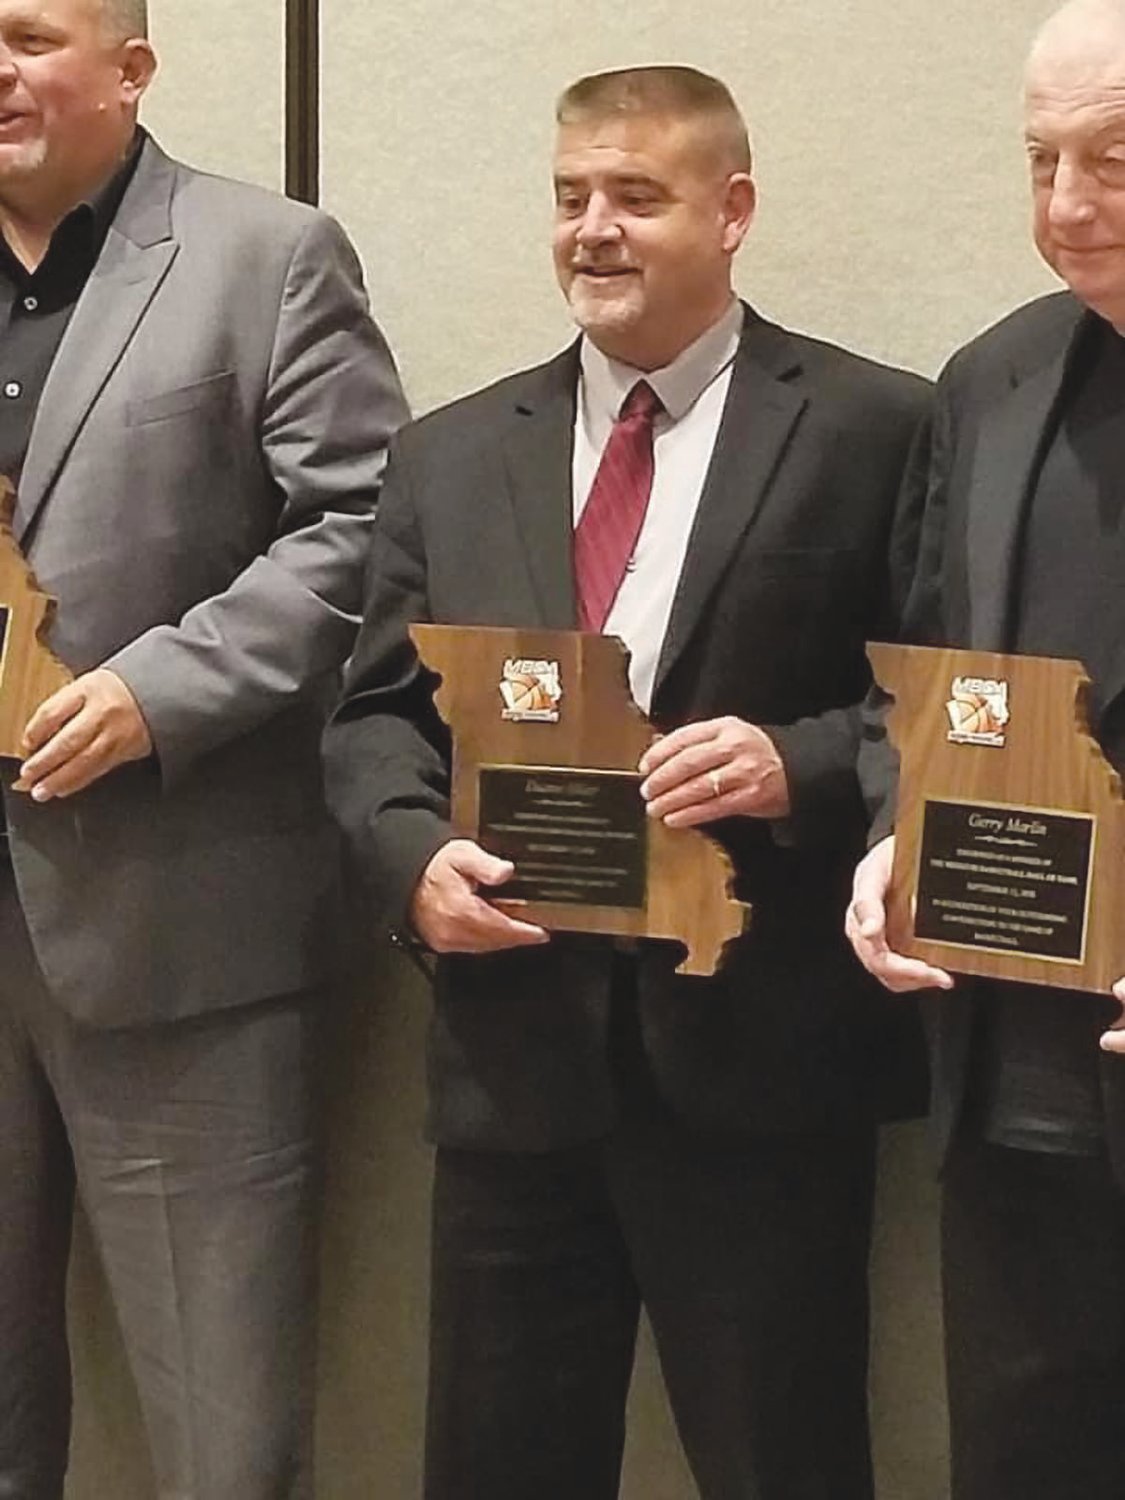 Mountain Grove’s Duane Hiler during the official induction ceremony for the Missouri Basketball Coaches Association (MBCA) Hall of Fame.